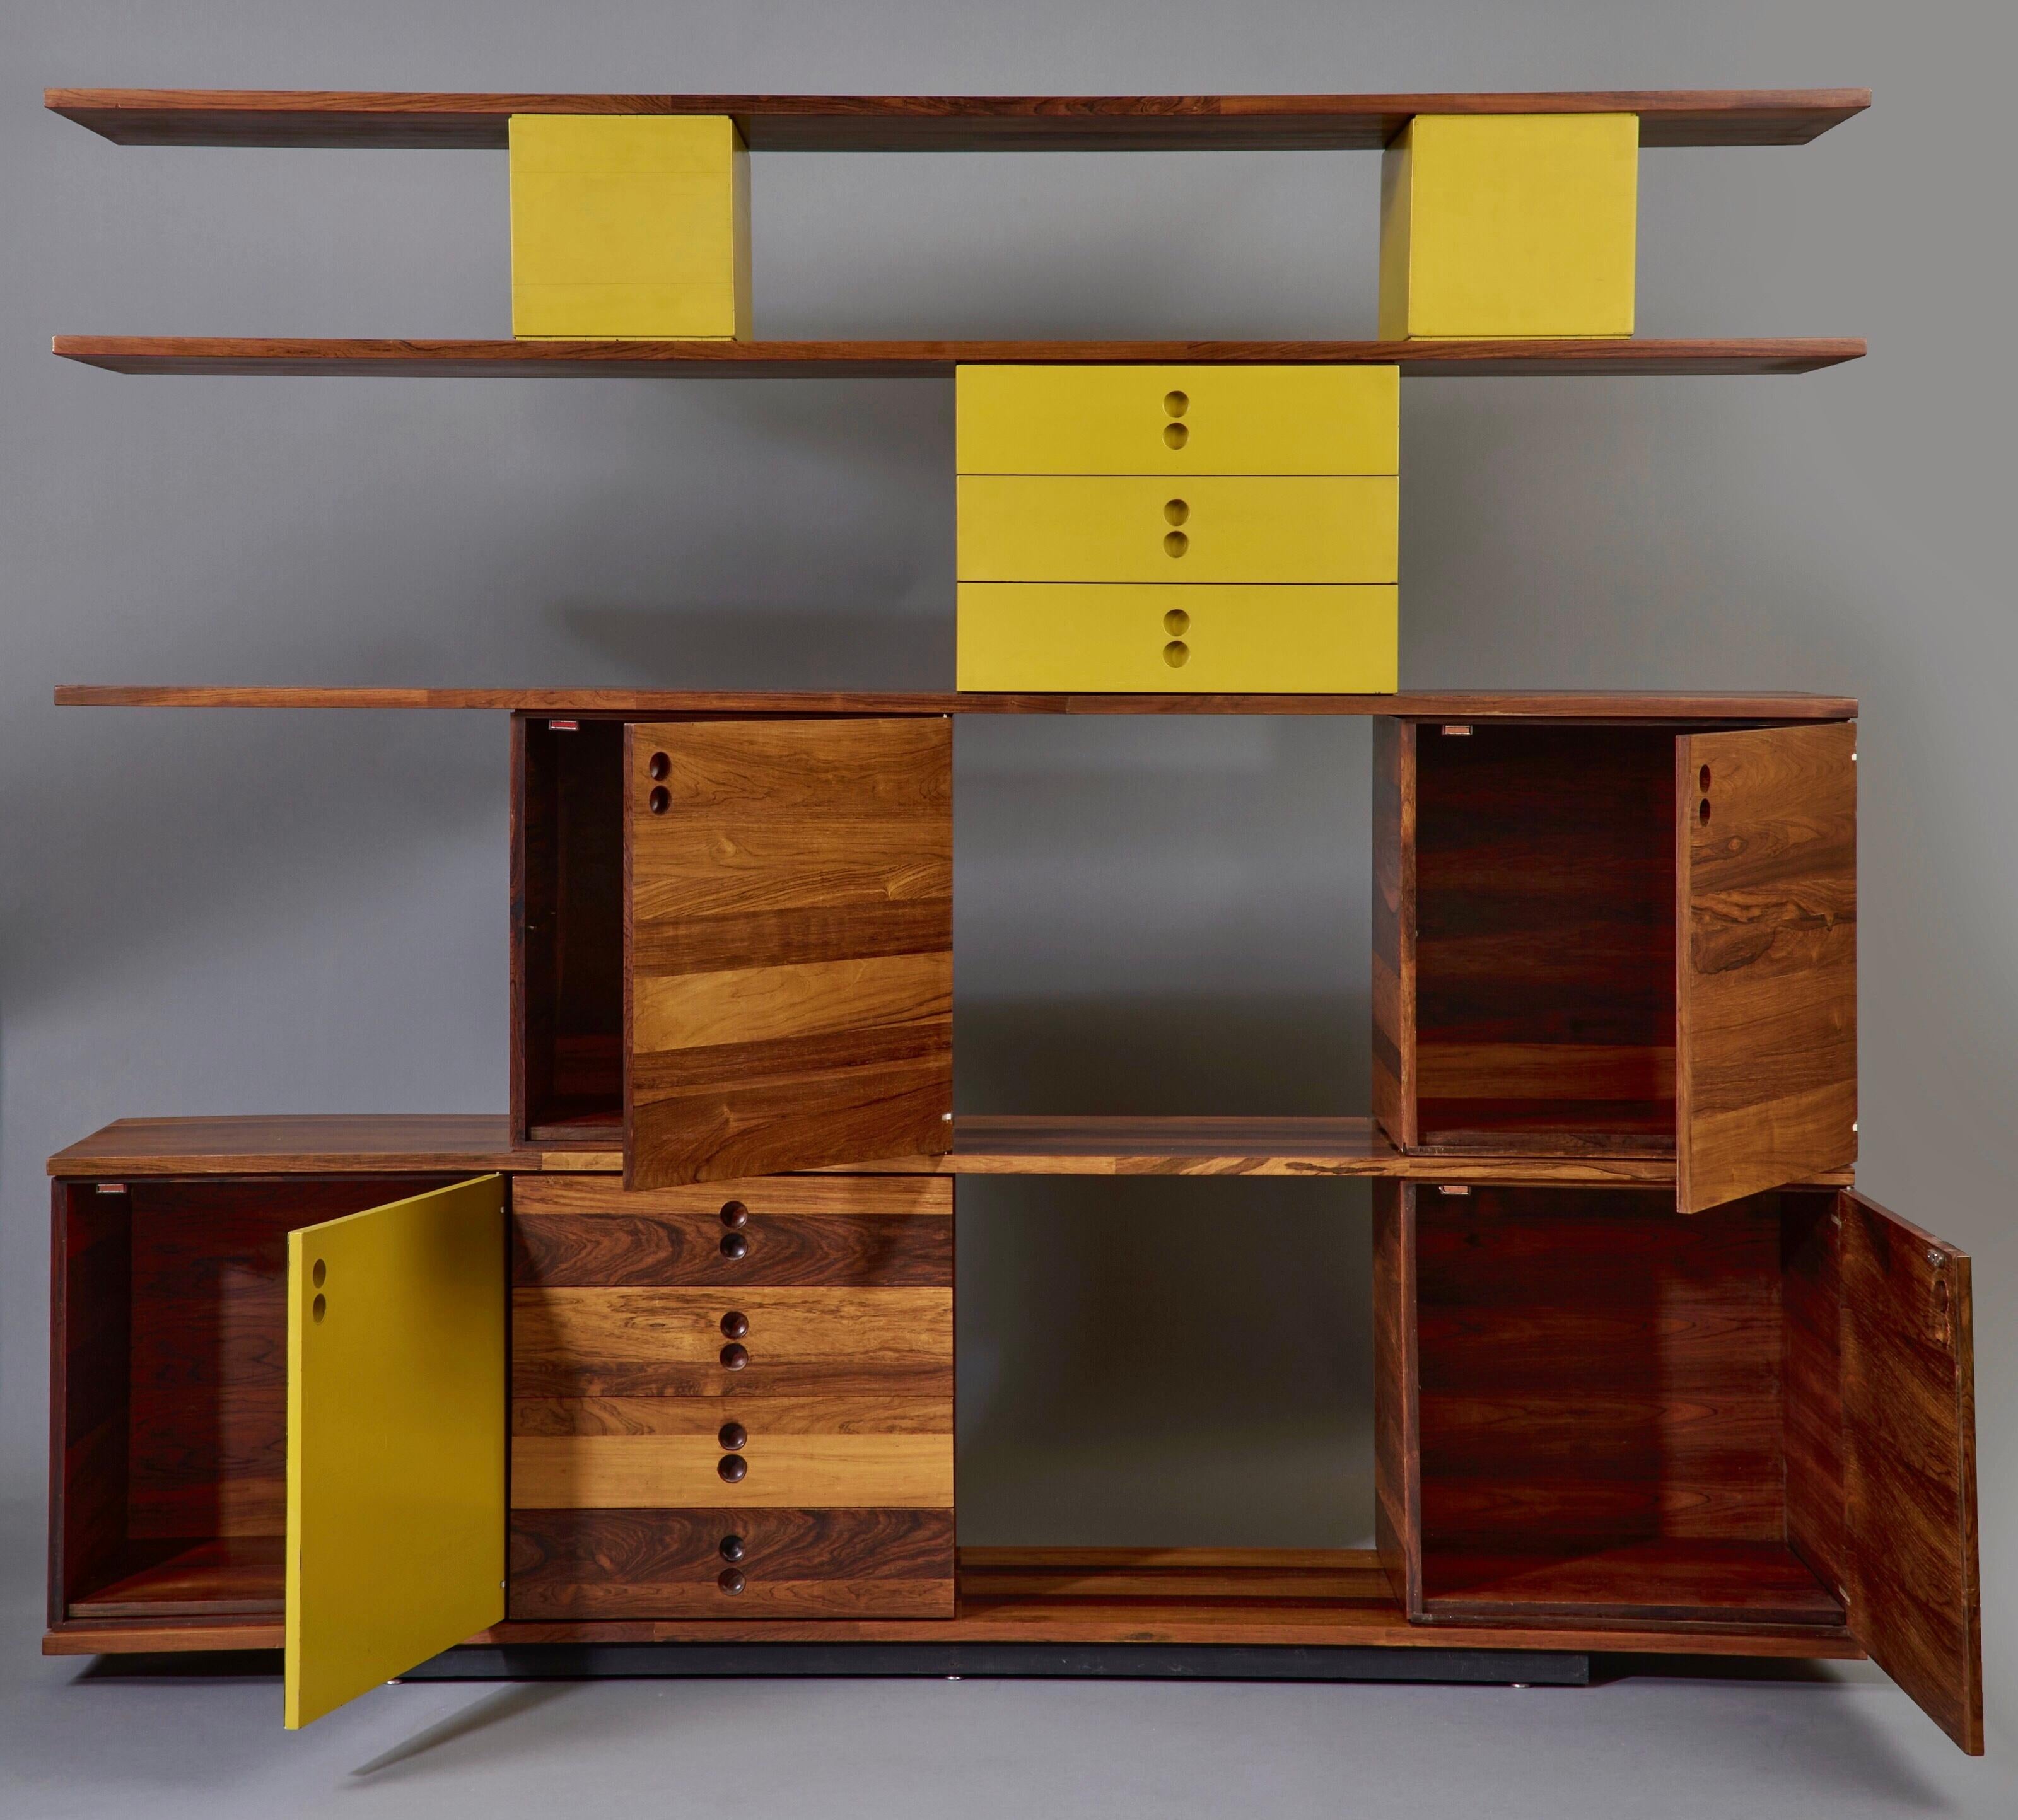 Wood Jorge Zalszupin, Exceptional Cabinet and Bookcase in Jacaranda, Brazil 1960s